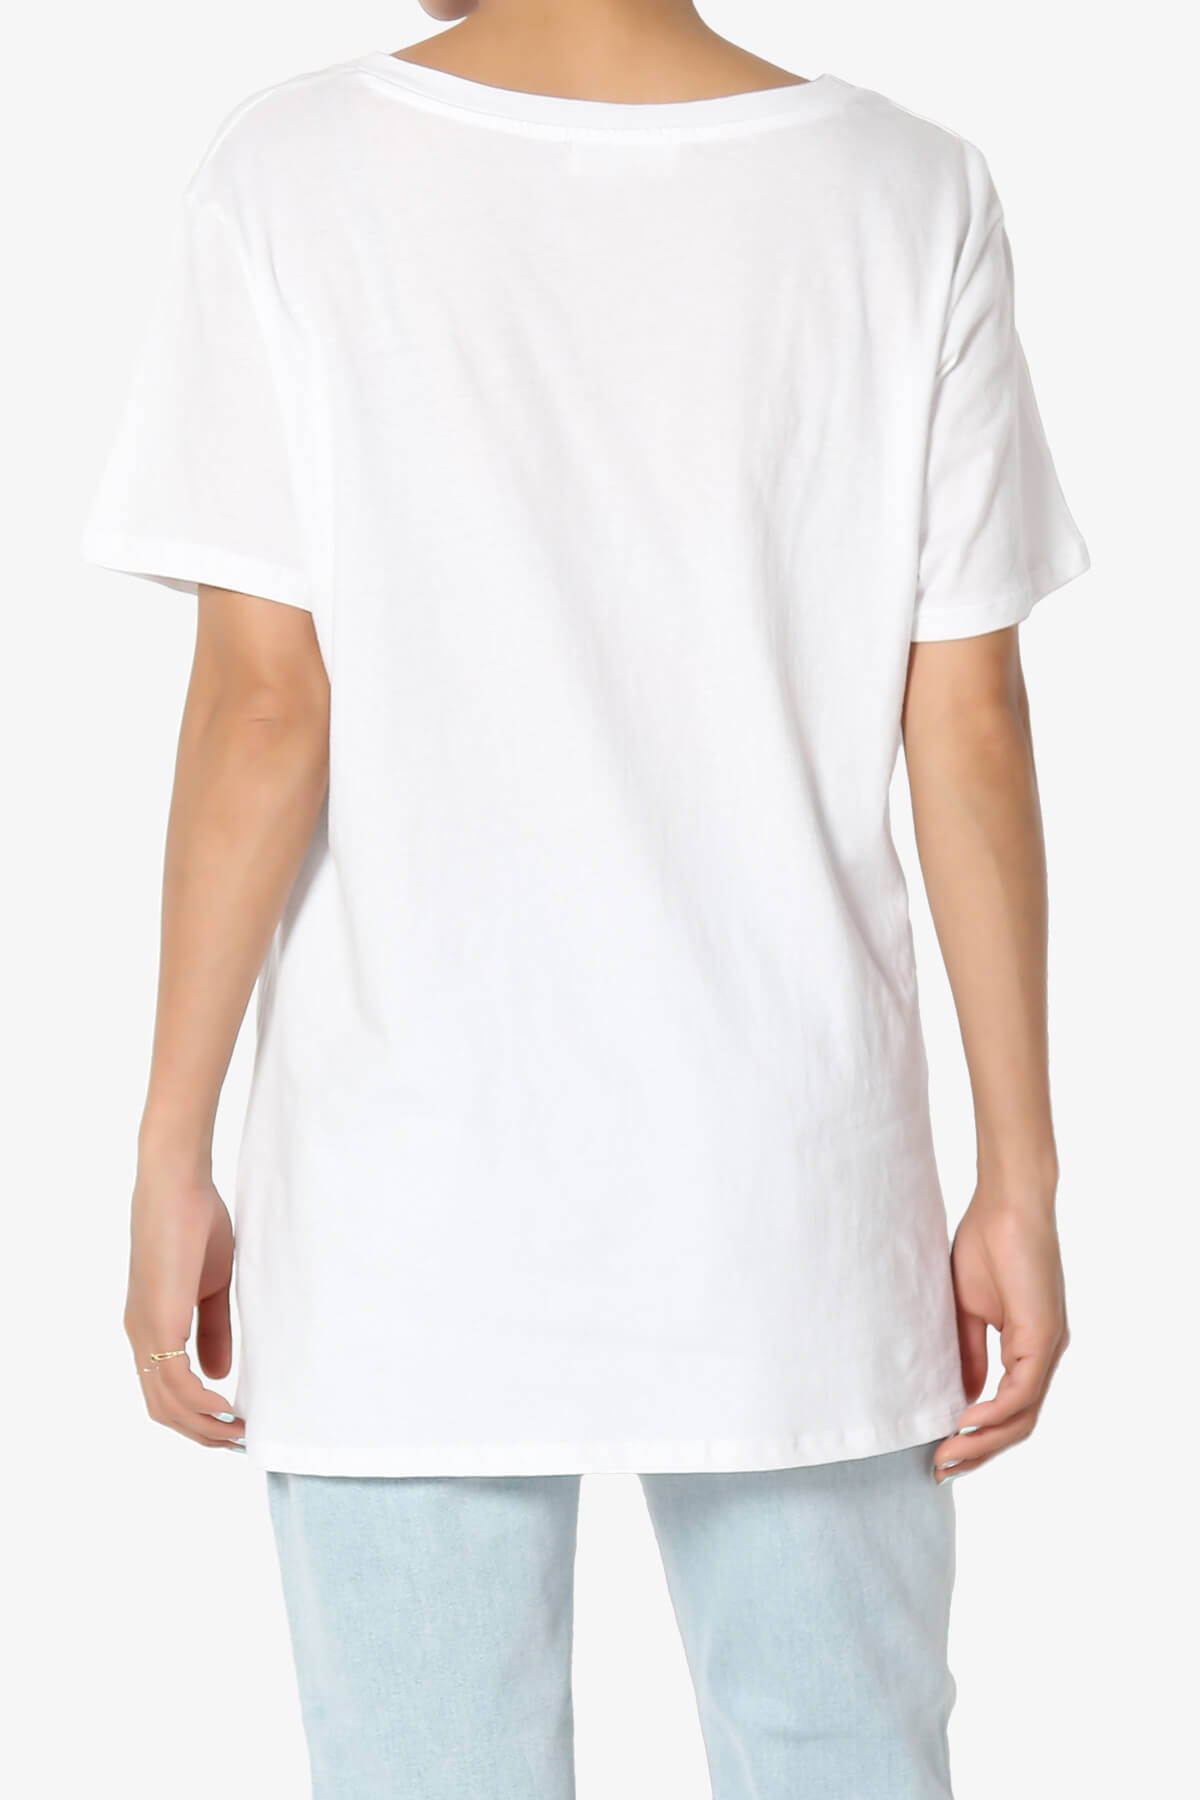 Load image into Gallery viewer, Mayra V-Neck Cotton Boyfriend Tee WHITE_2
